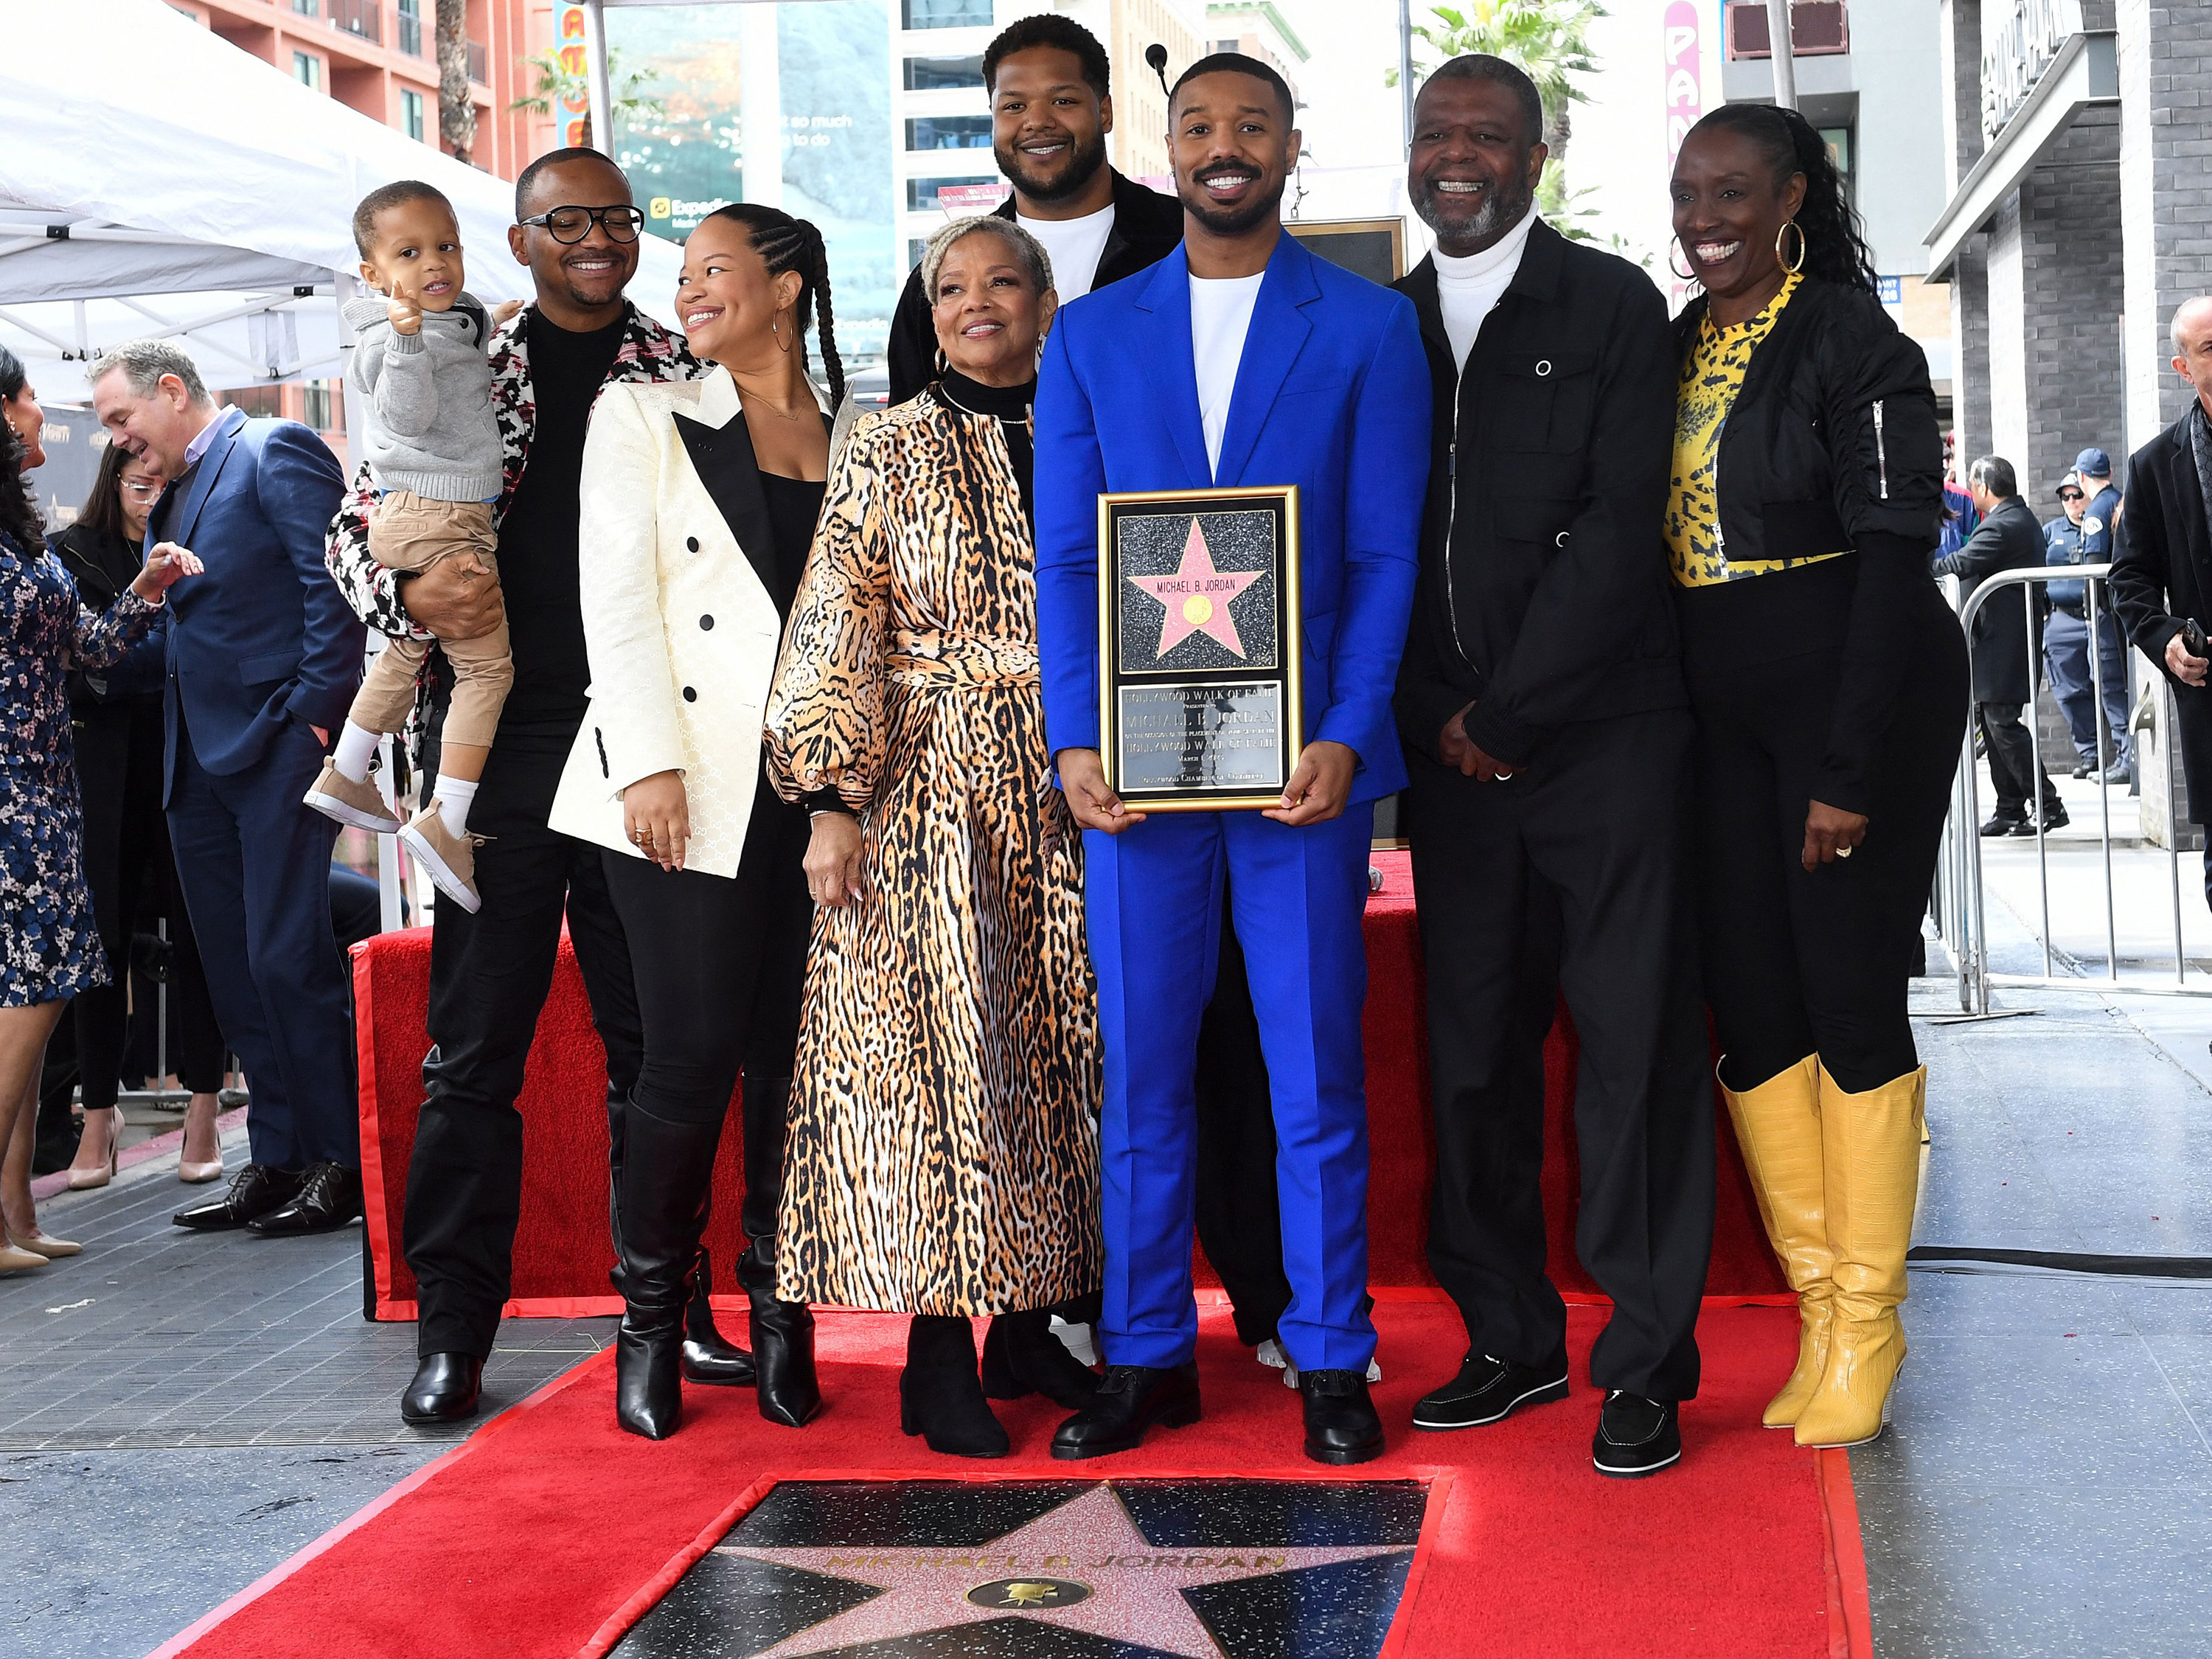 U.S. actor/director Michael B. Jordan (C) and his family pose during the unveiling of his Hollywood Walk of Fame star during a ceremony in Hollywood, Calif. on March 1, 2023.